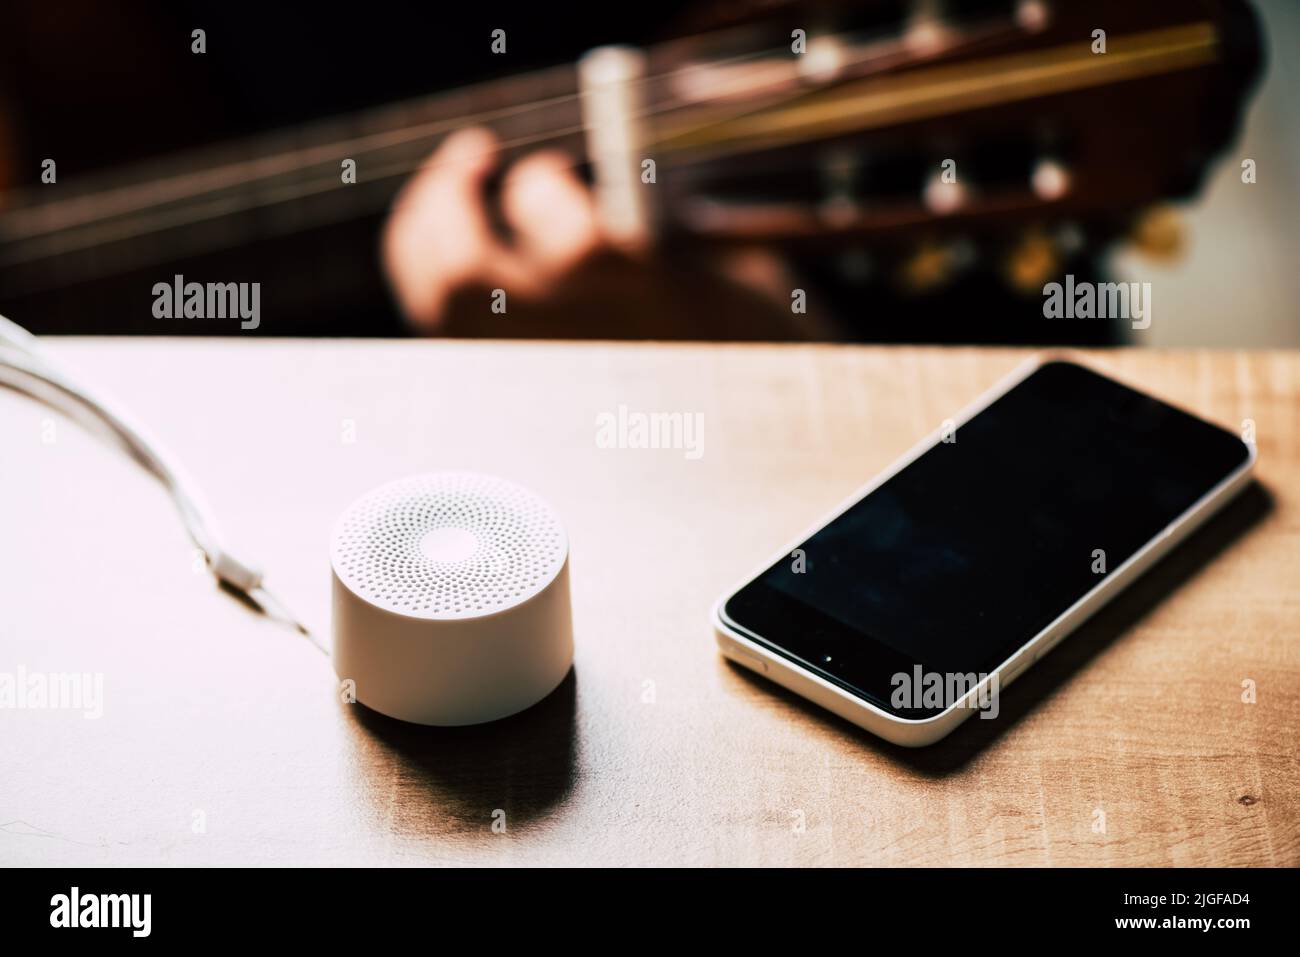 mini wireless portable bluetooth speaker for music listening. Voice assistant speaker at home. Stock Photo